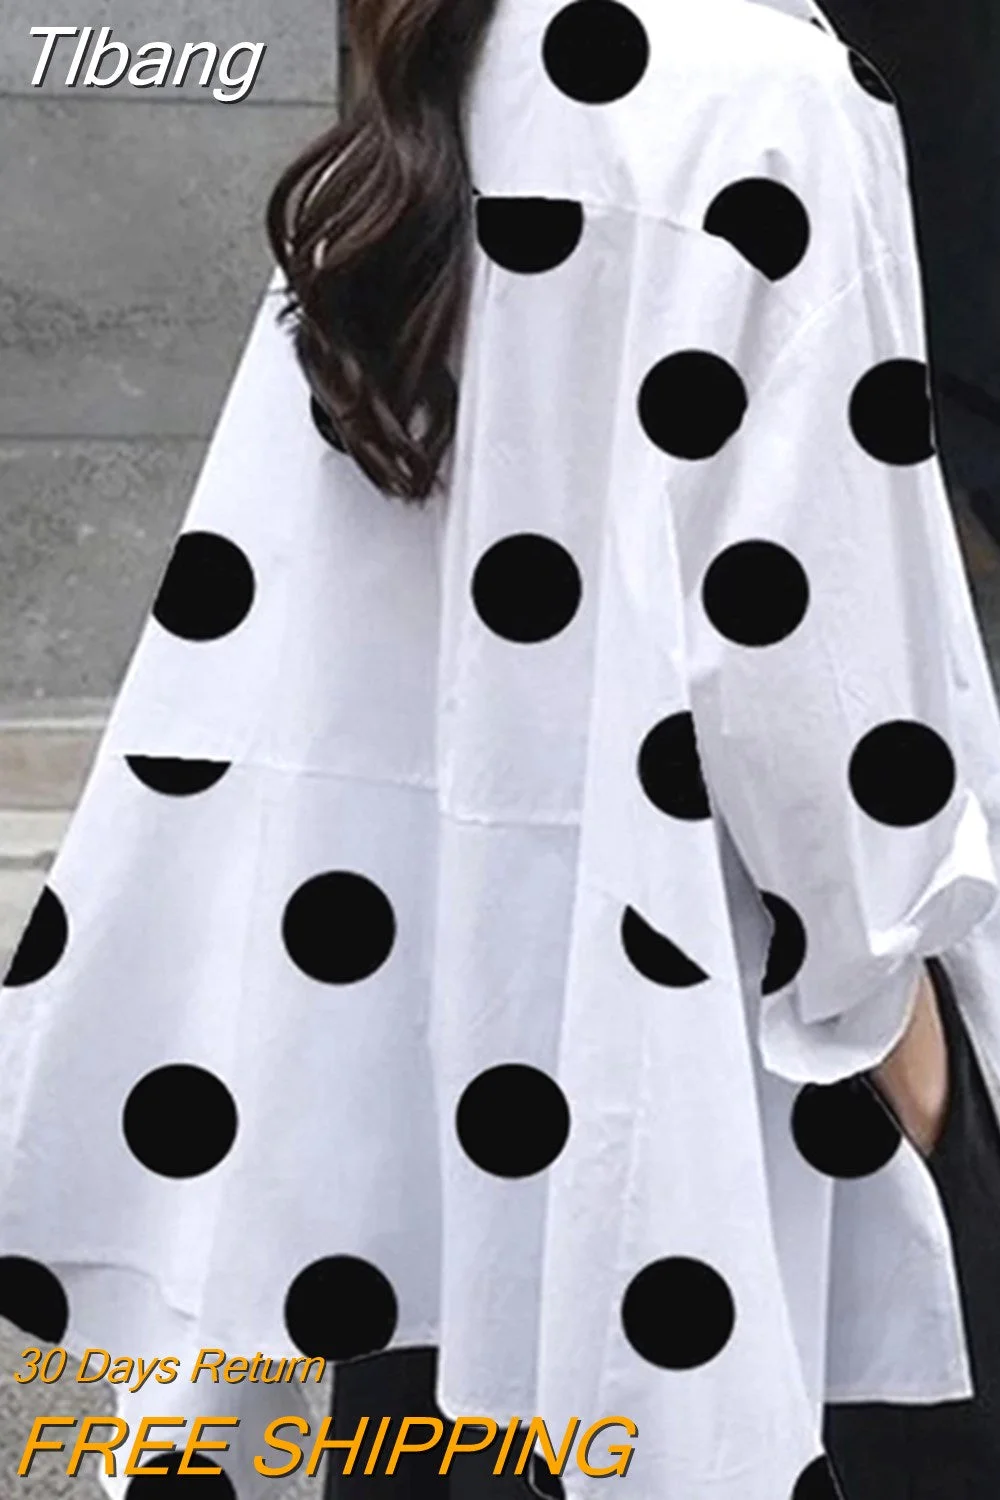 Tlbang Polka-Dot Blouse Split-Side Lapel Long Sleeves Fashion Buttoned High-Low Casual Simple Office Lady Shirts For Women 2023